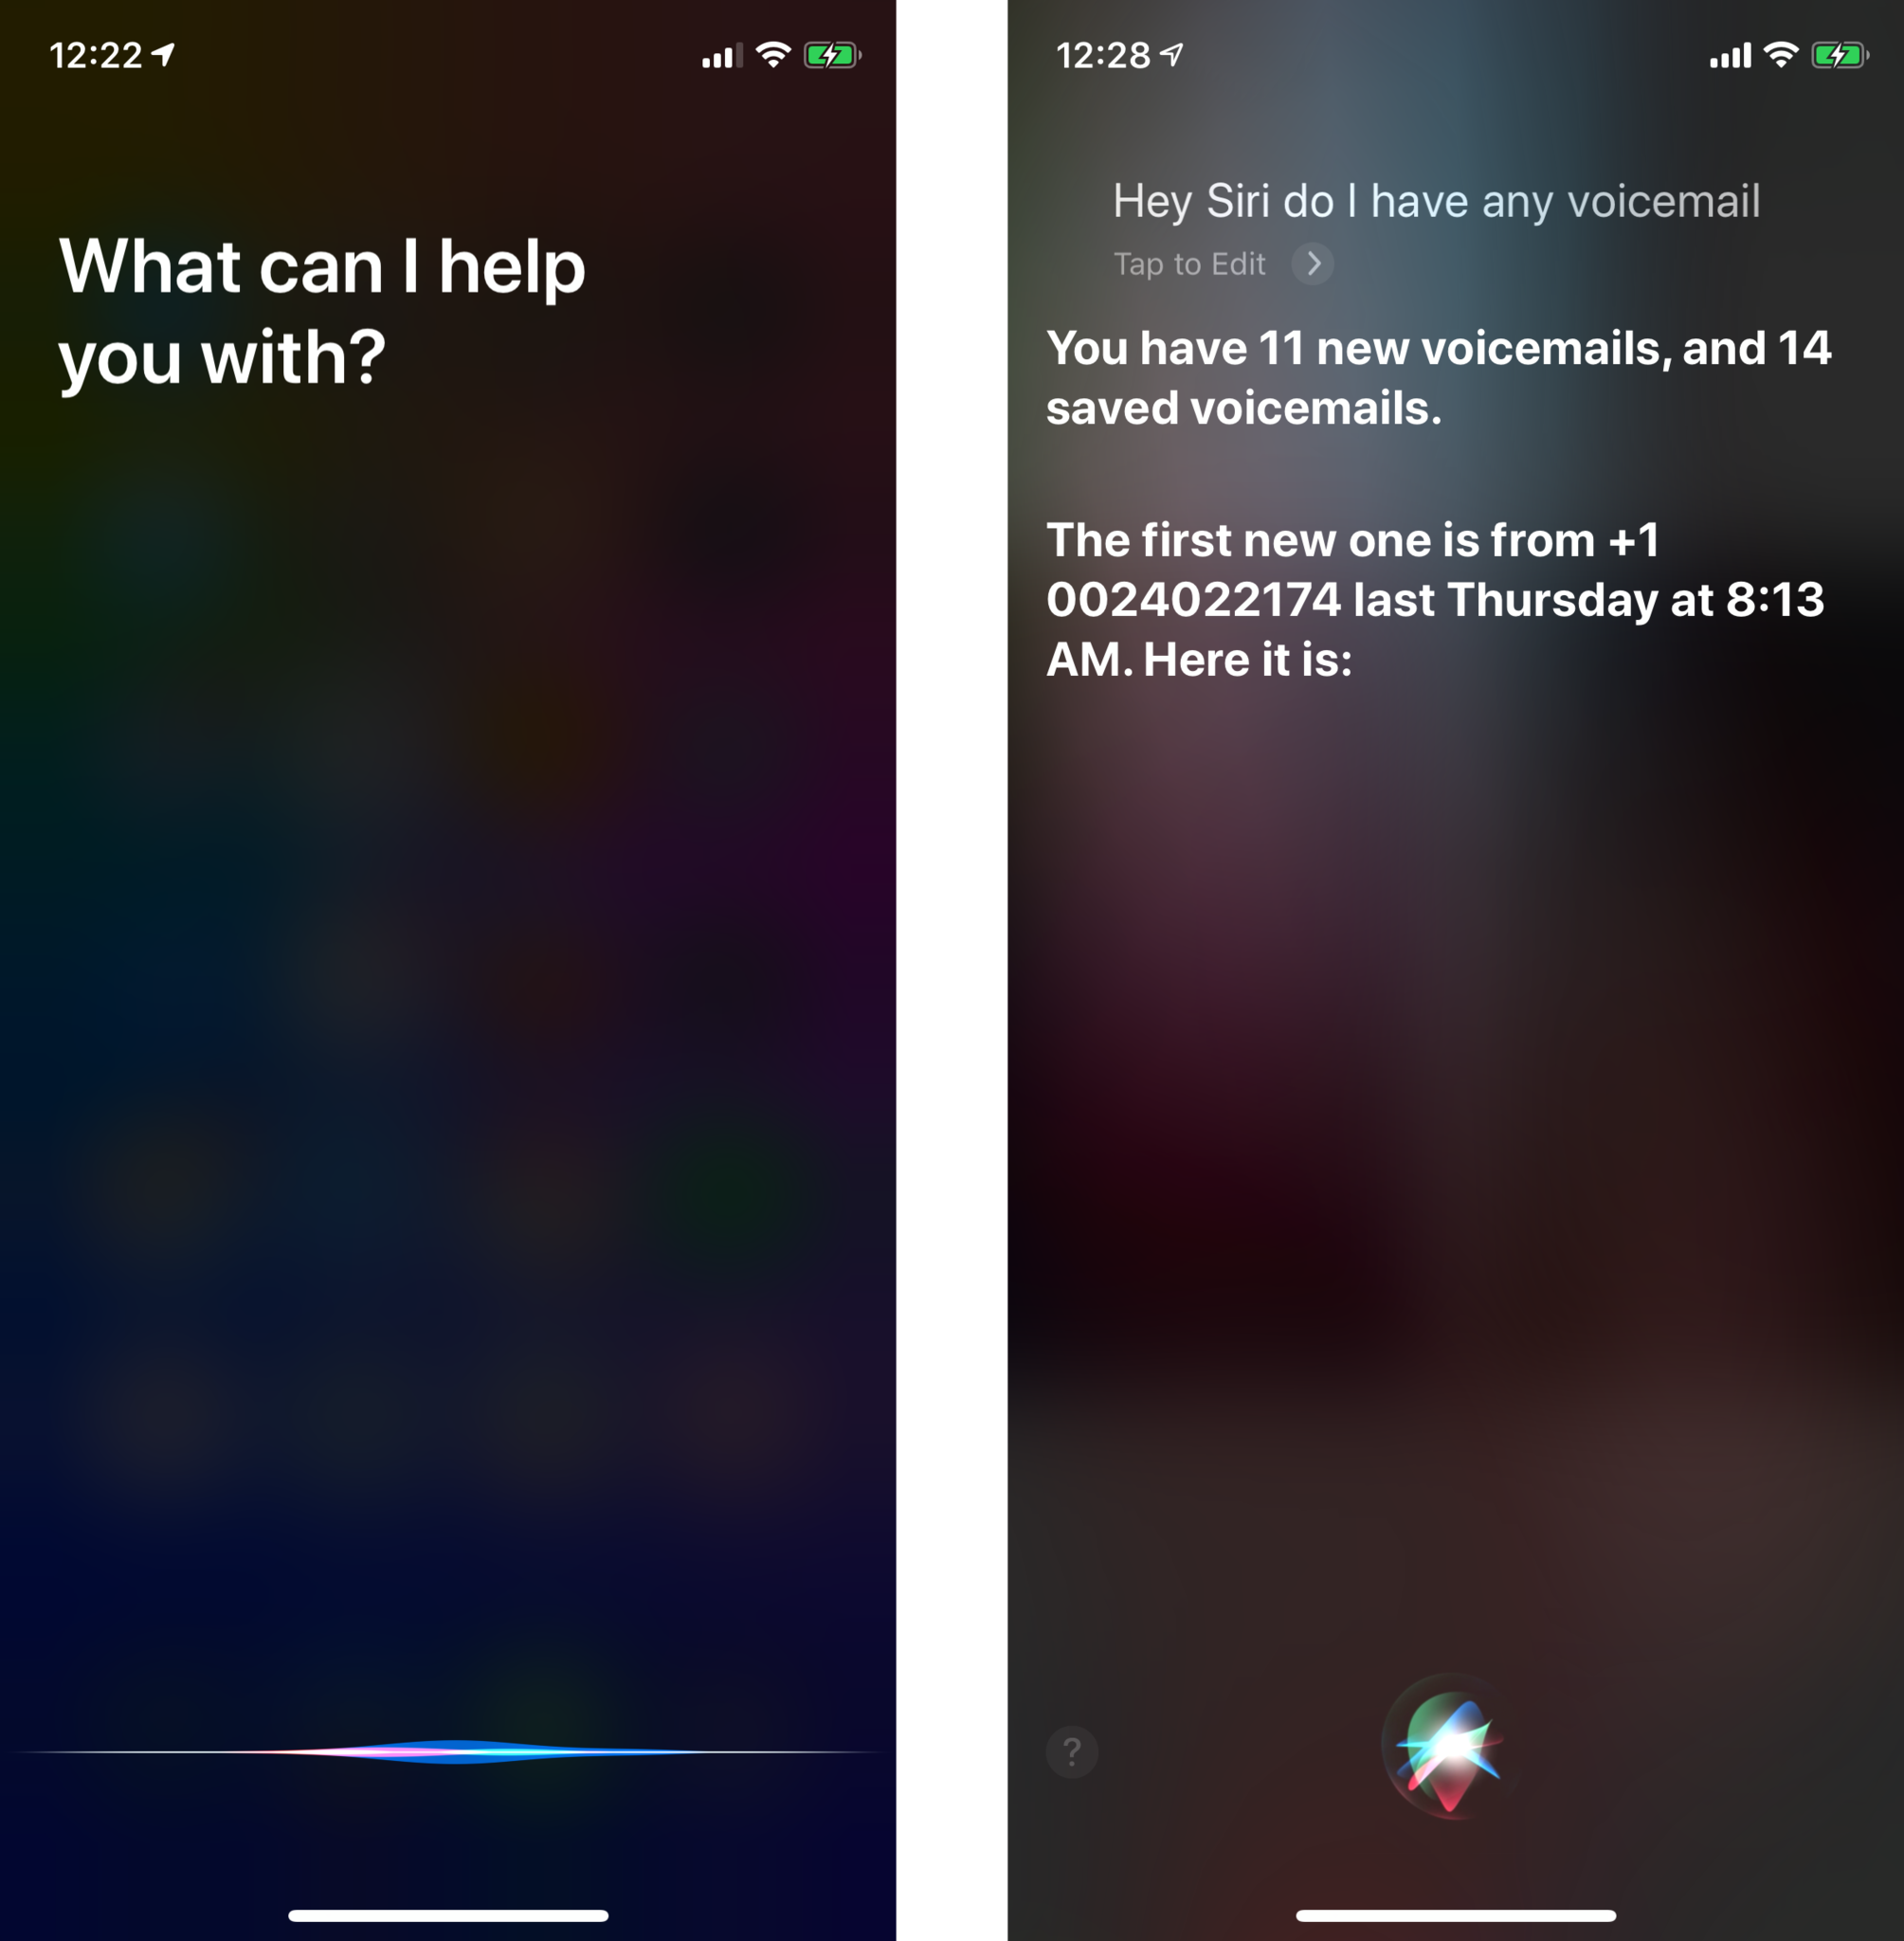 Tell Siri you want to hear your voicemails